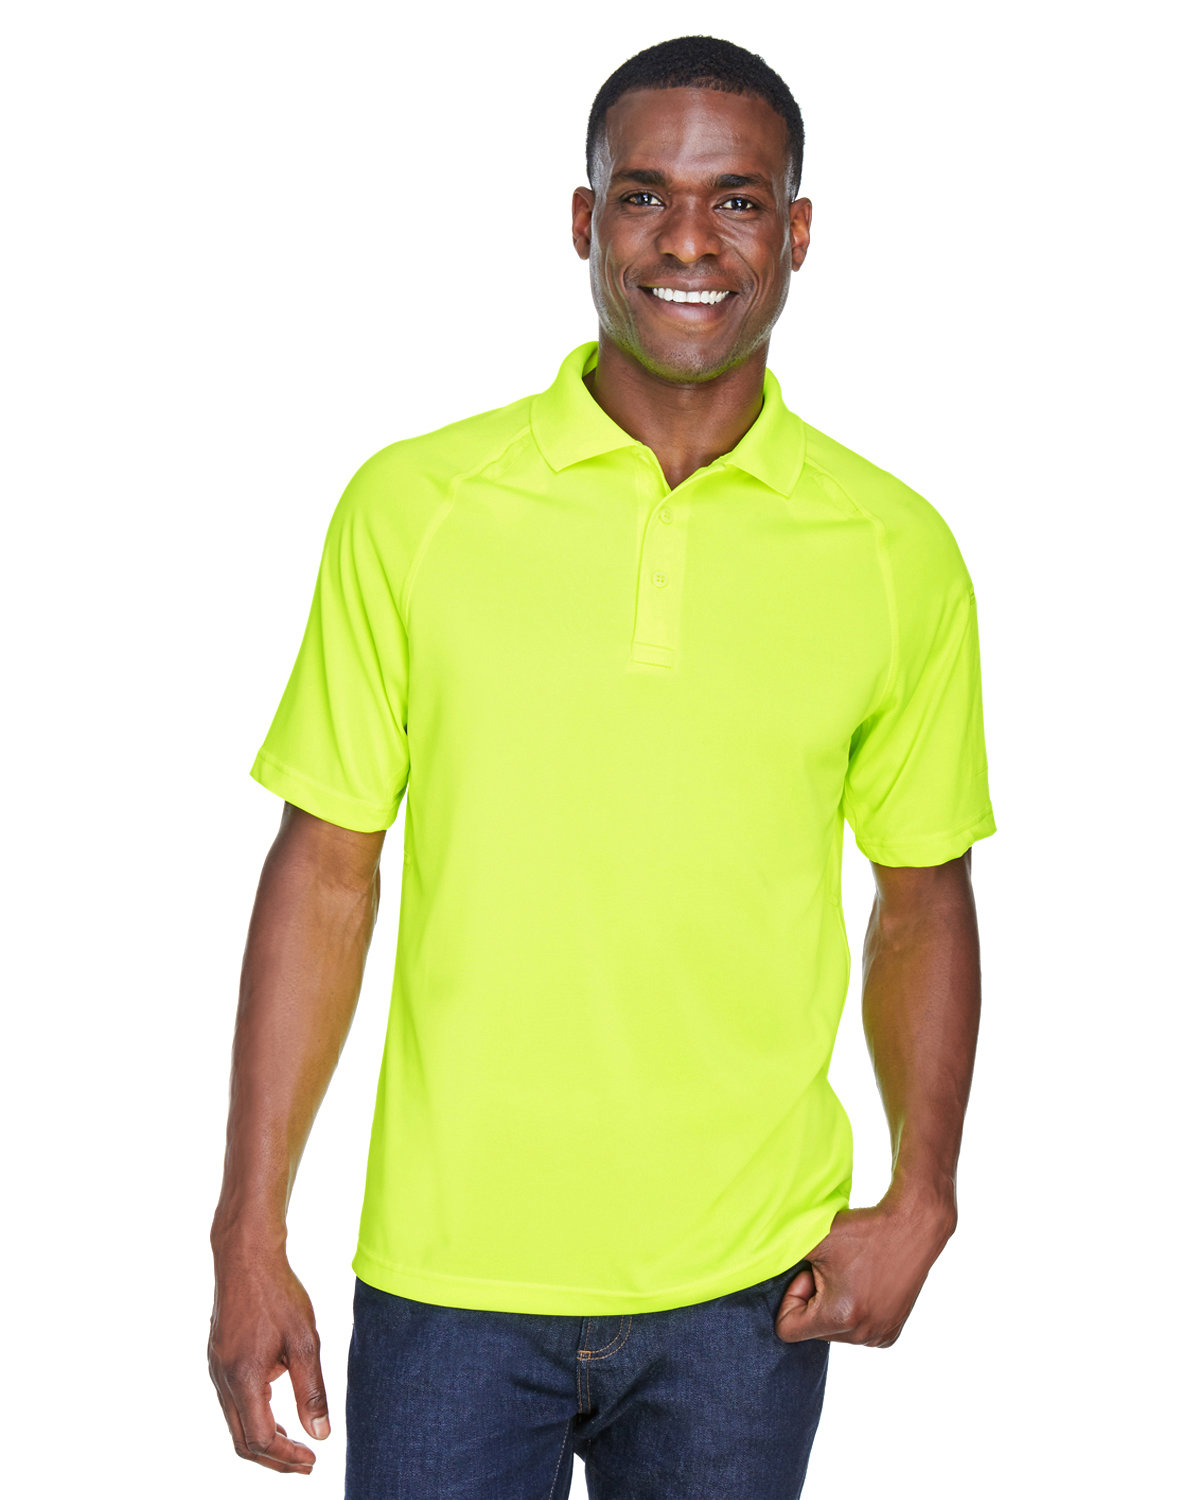 Harriton Men's Tactical Performance Polo SAFETY YELLOW 